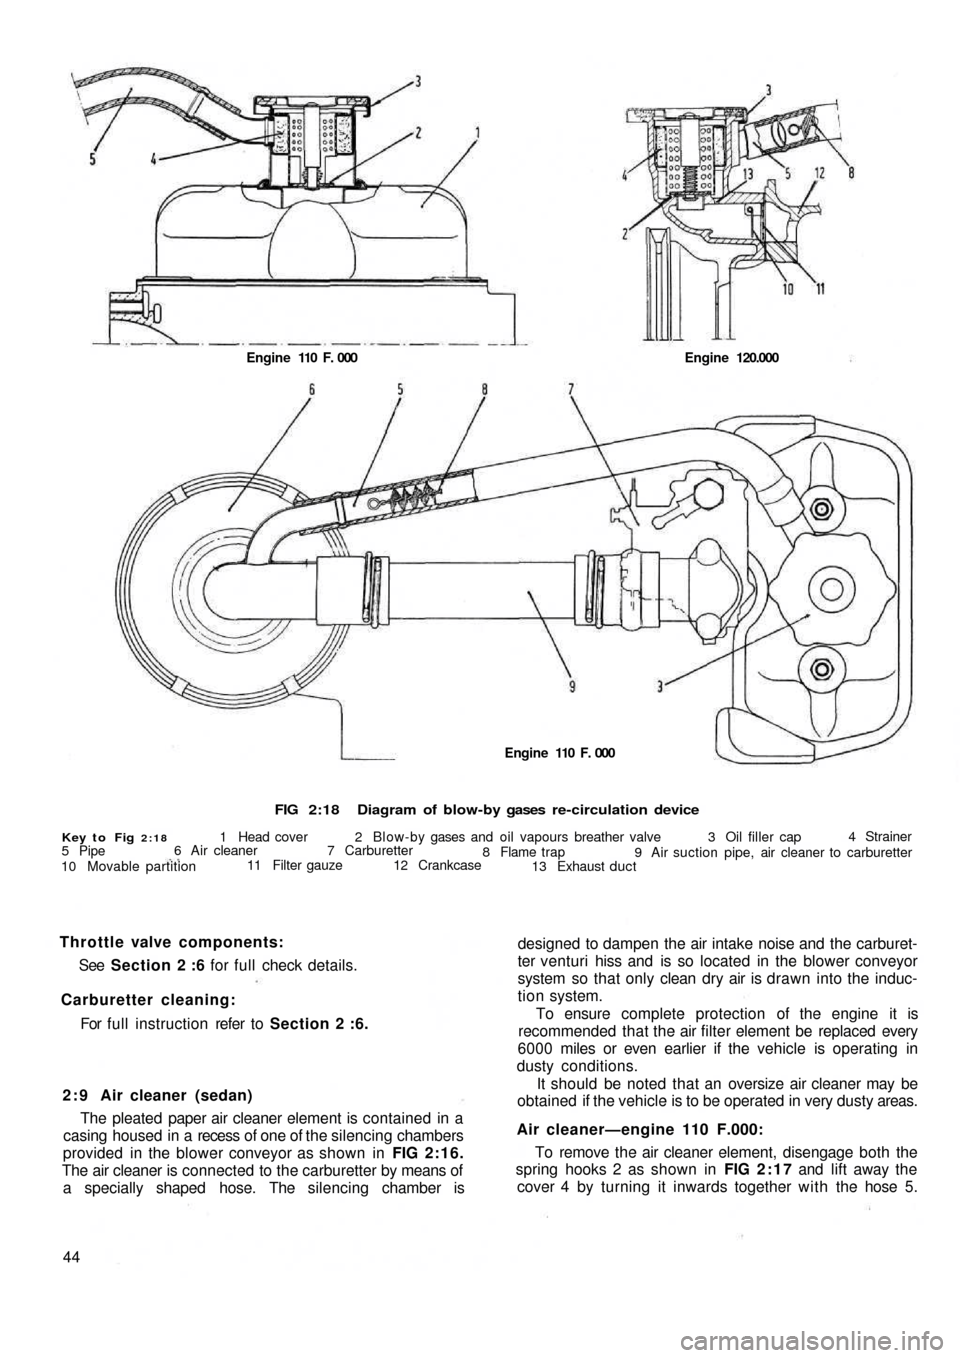 FIAT 500 1960 1.G Workshop Manual FIG 2:18Diagram of blow-by gases  re-circulation device
Key to Fig 2:181 Head cover 2 Blow-by gases and  oil vapours breather valve 3 Oil filler cap4 Strainer
9 Air suction pipe, air cleaner to carbur